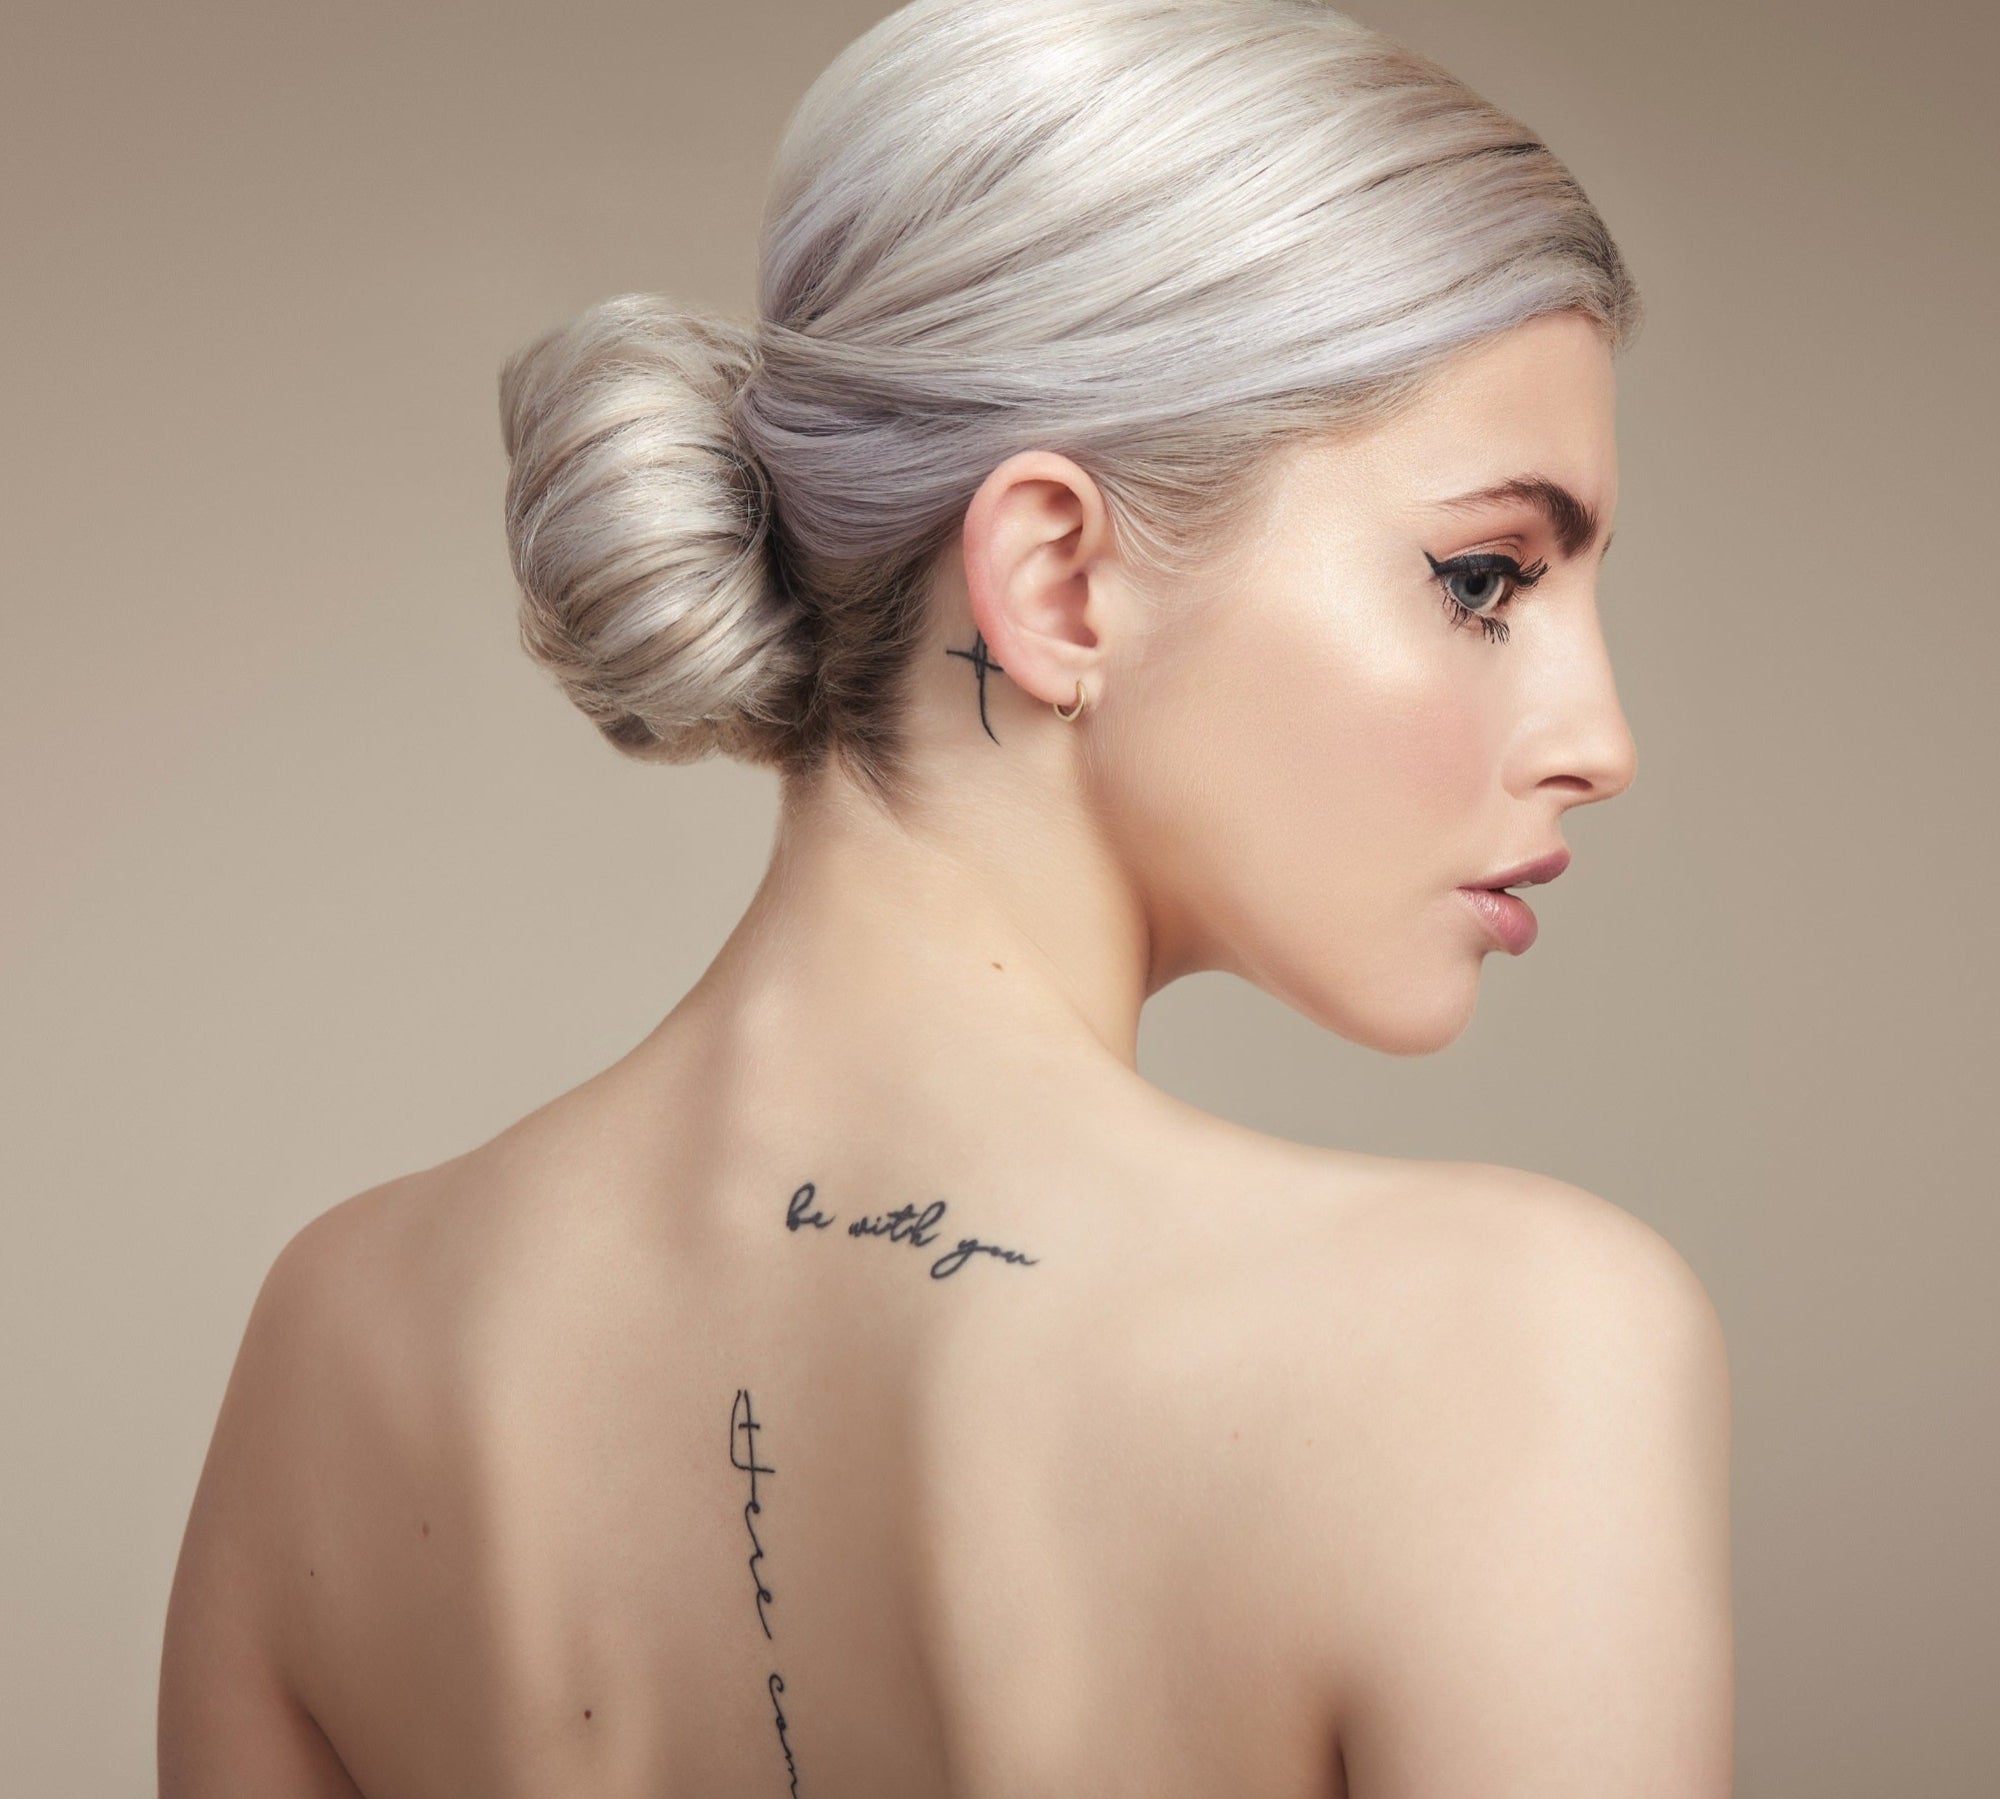 Female model with her back to the camera. Her platinum blonde hair is in a neat low bun, back is bare and she has tattoos down her spine 